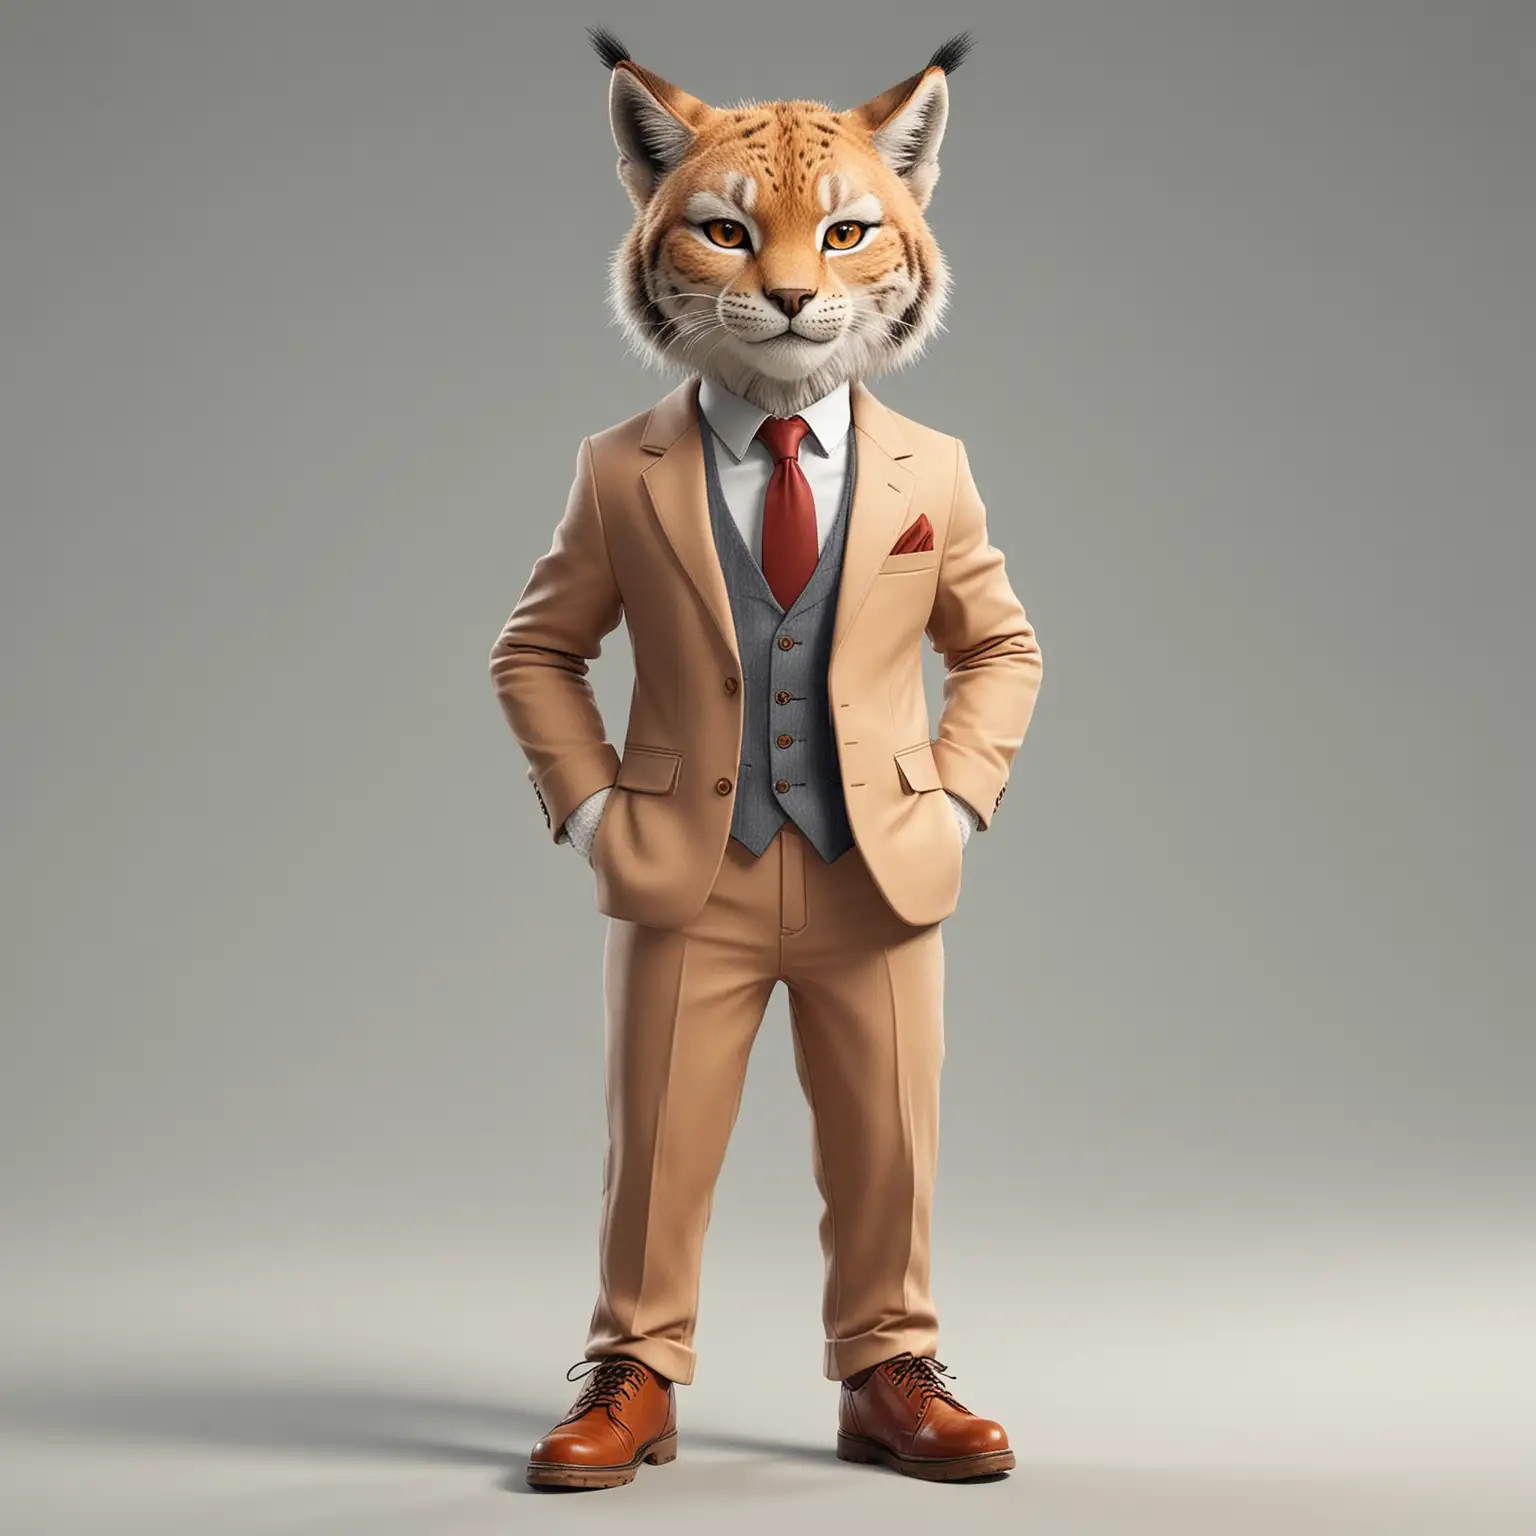 a lynx cartoon style, full body, in suit clothes, with shoes, clear background